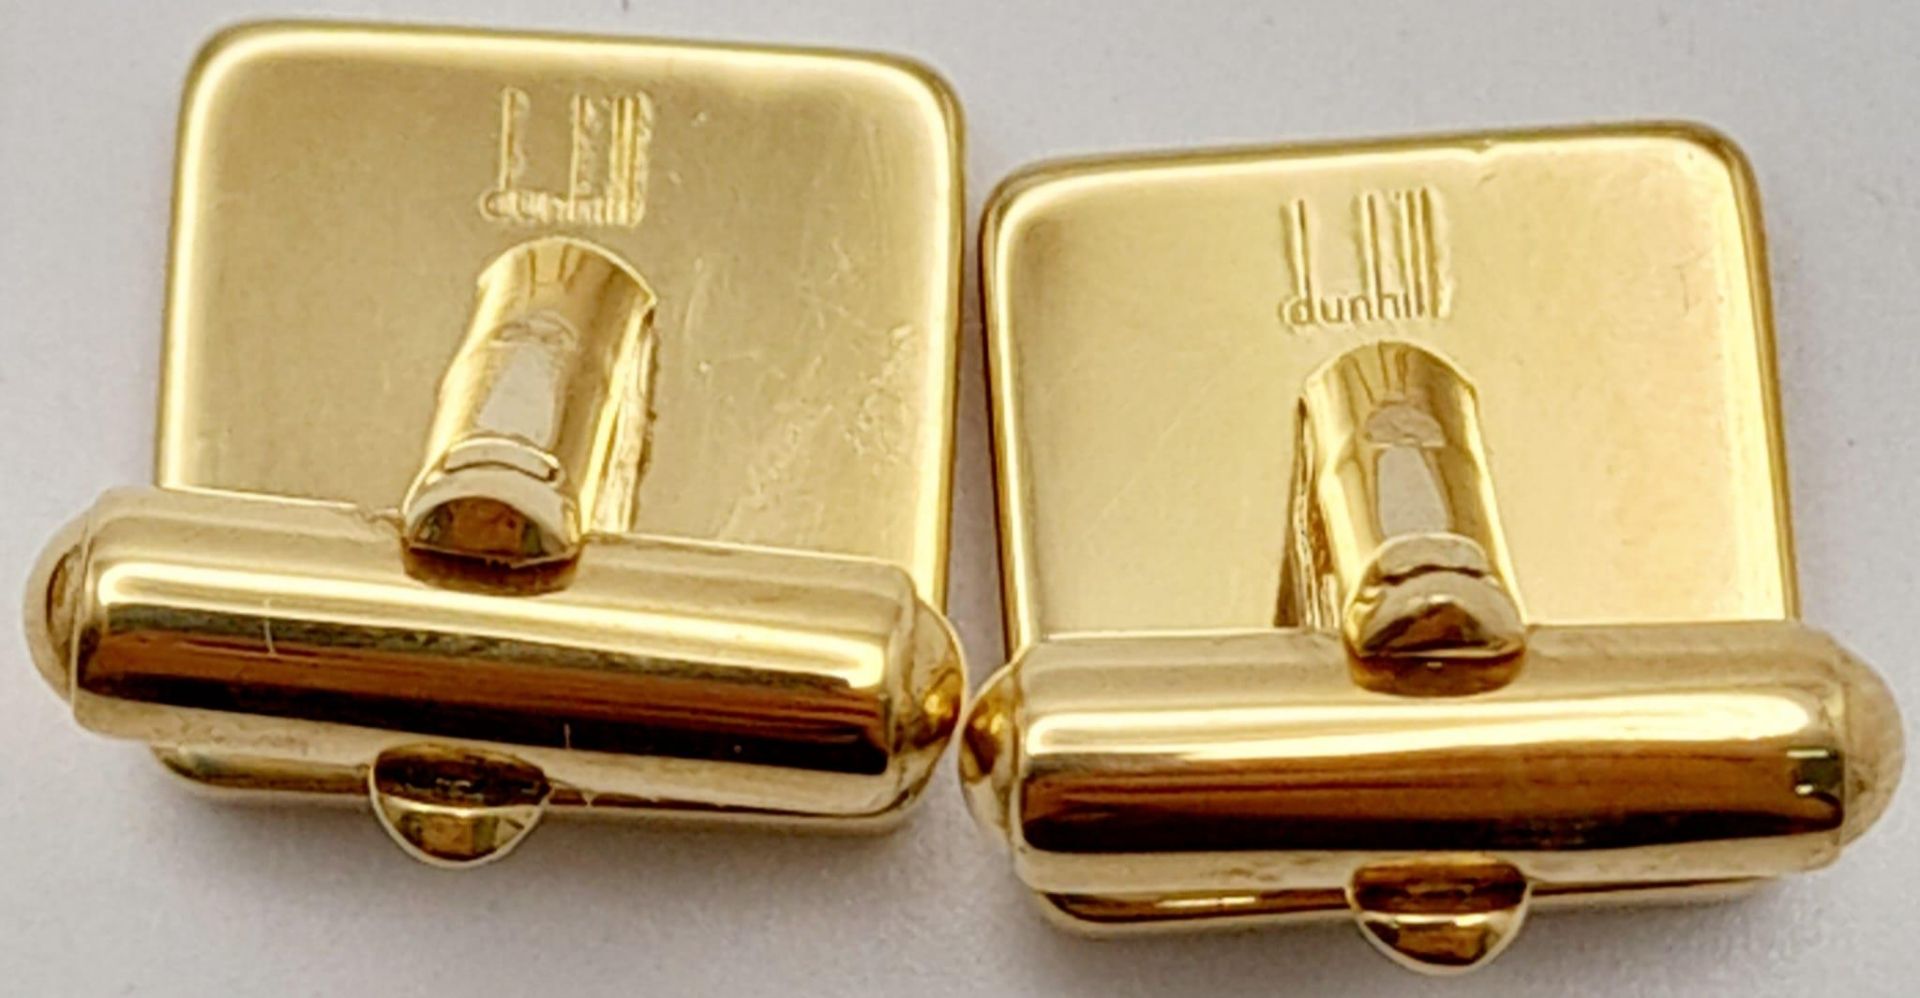 An Excellent Condition Pair of Square Yellow Gold Gilt Tortoiseshell Cufflinks by Dunhill in their - Image 4 of 8